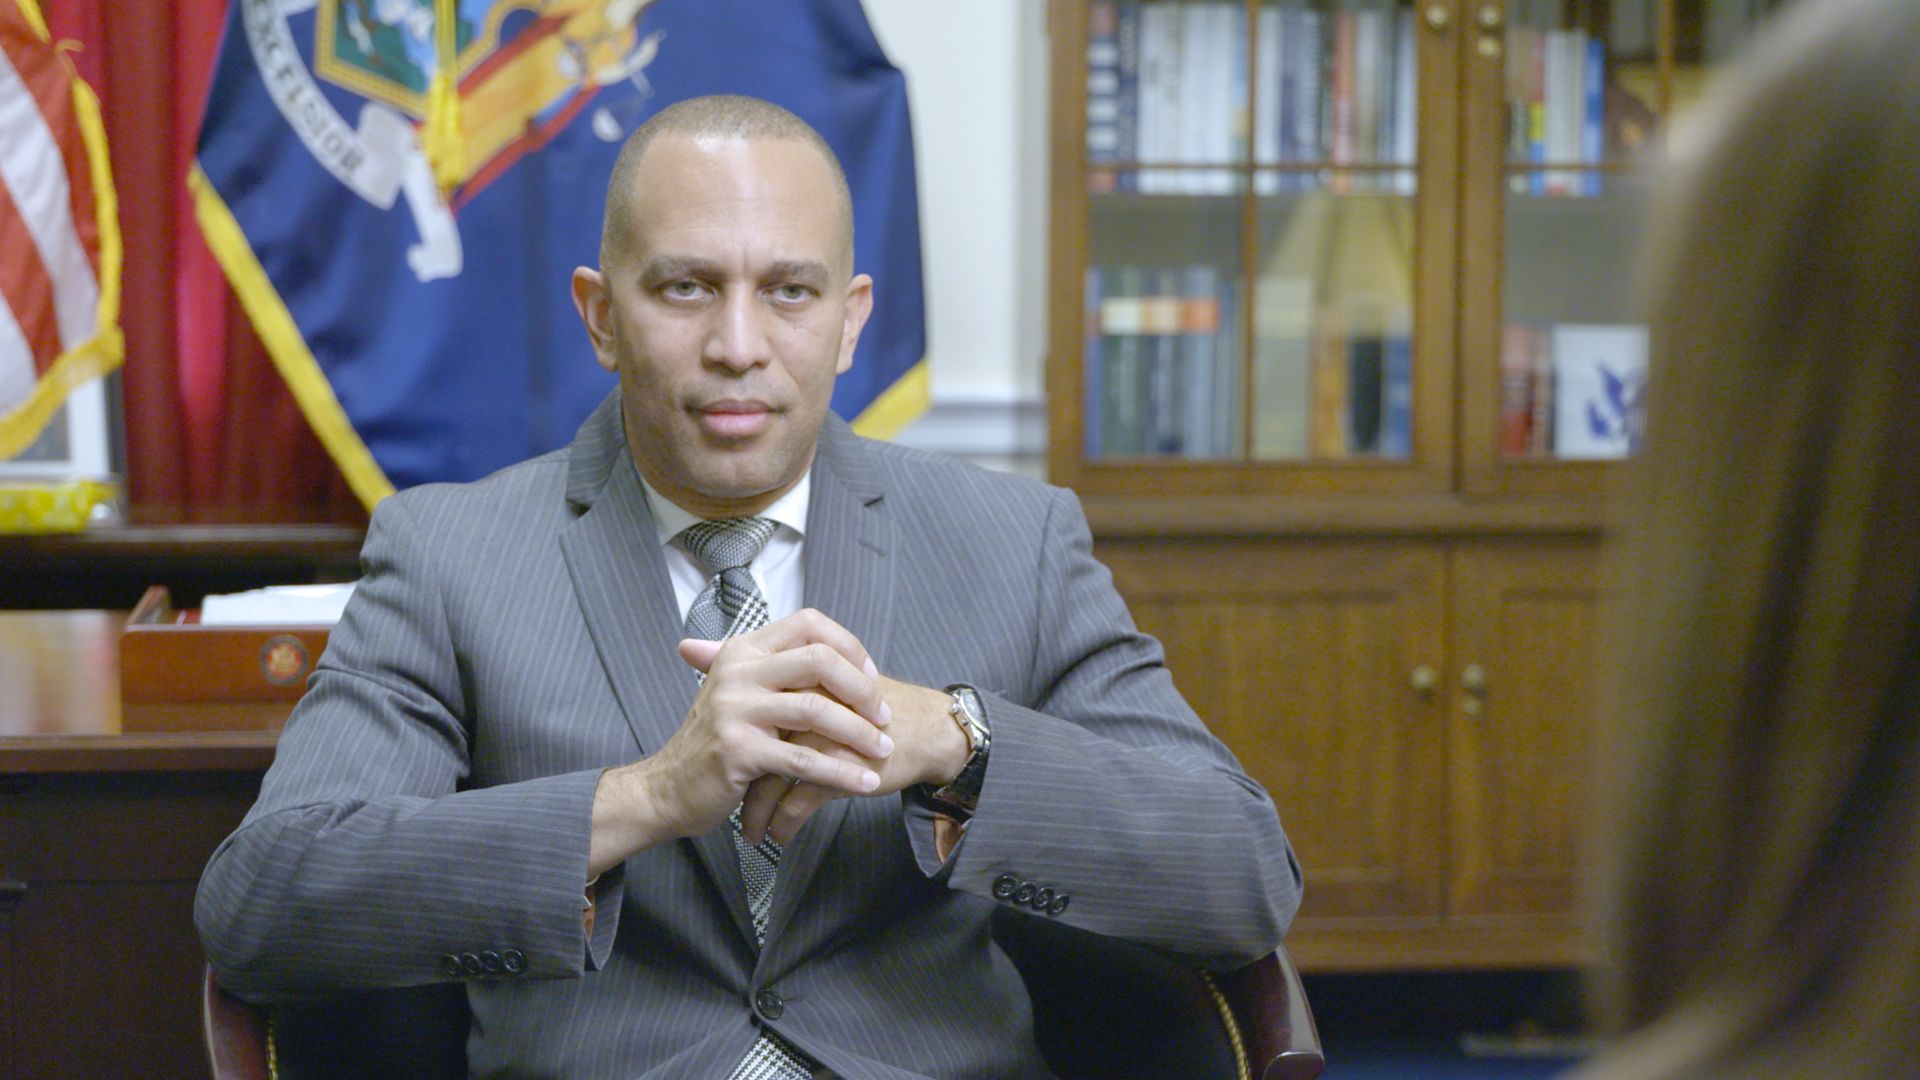 Rep. Hakeem Jeffries is seen during an interview with "Axios on HBO."